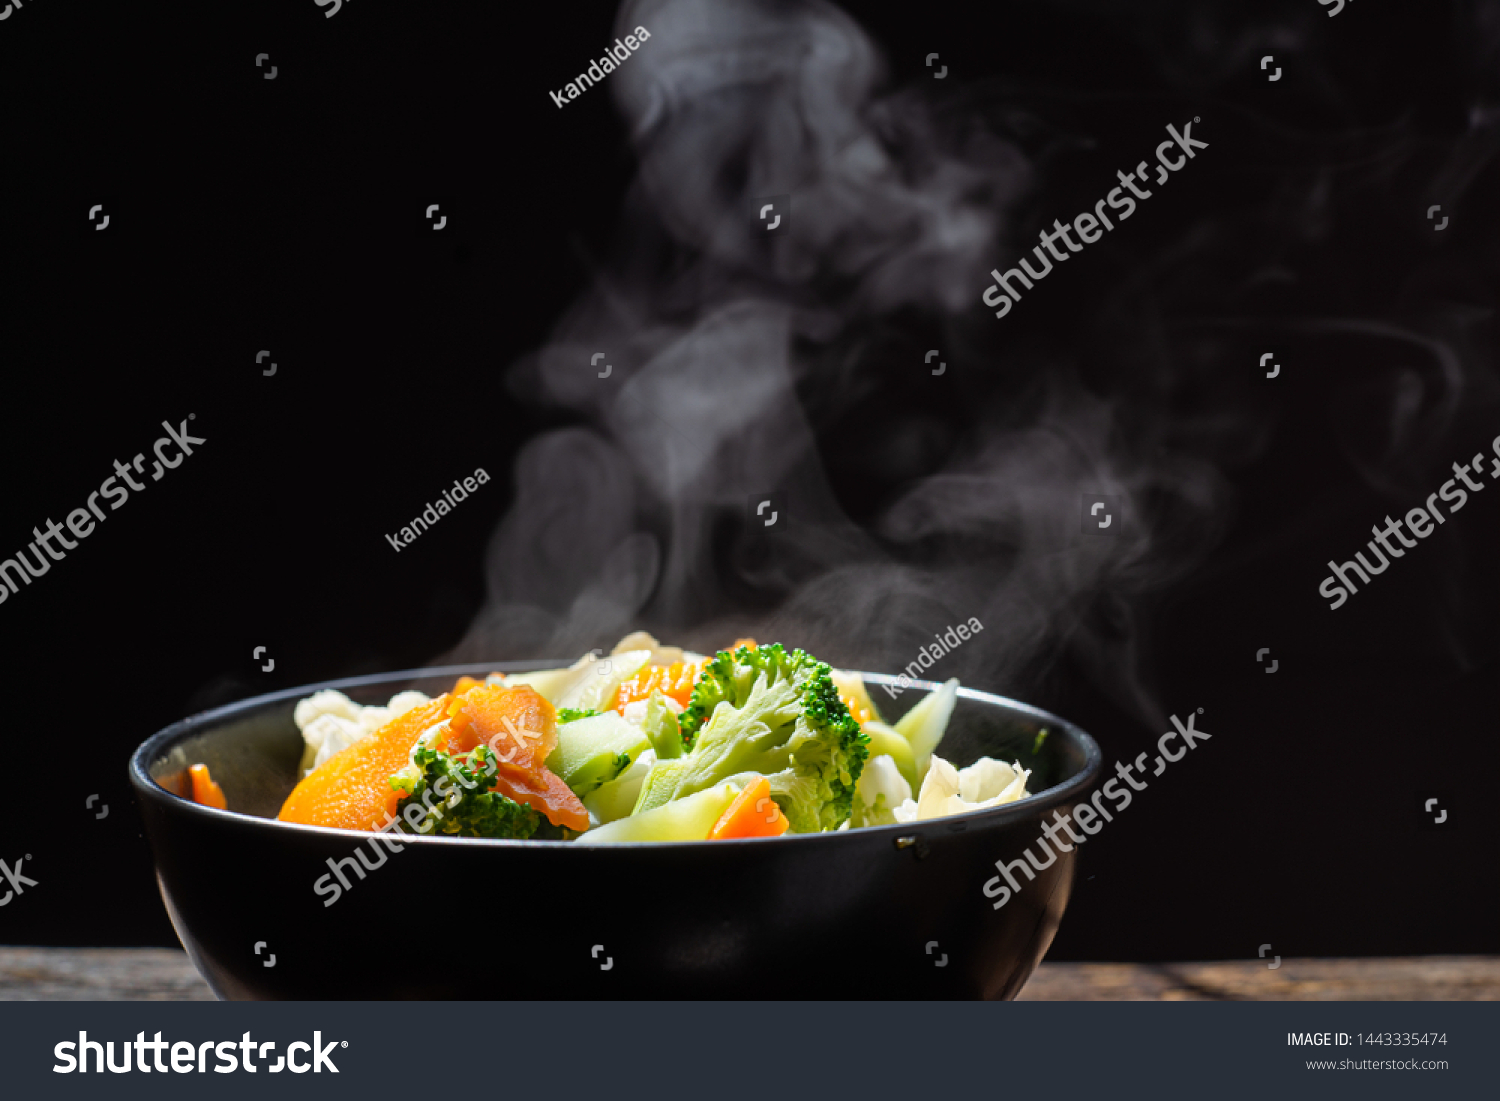 The steam from the vegetables carrot broccoli Cauliflower in black bowl  , a steaming. Boiled hot Healthy food on table on black background,hot food and healthy meal concept #1443335474